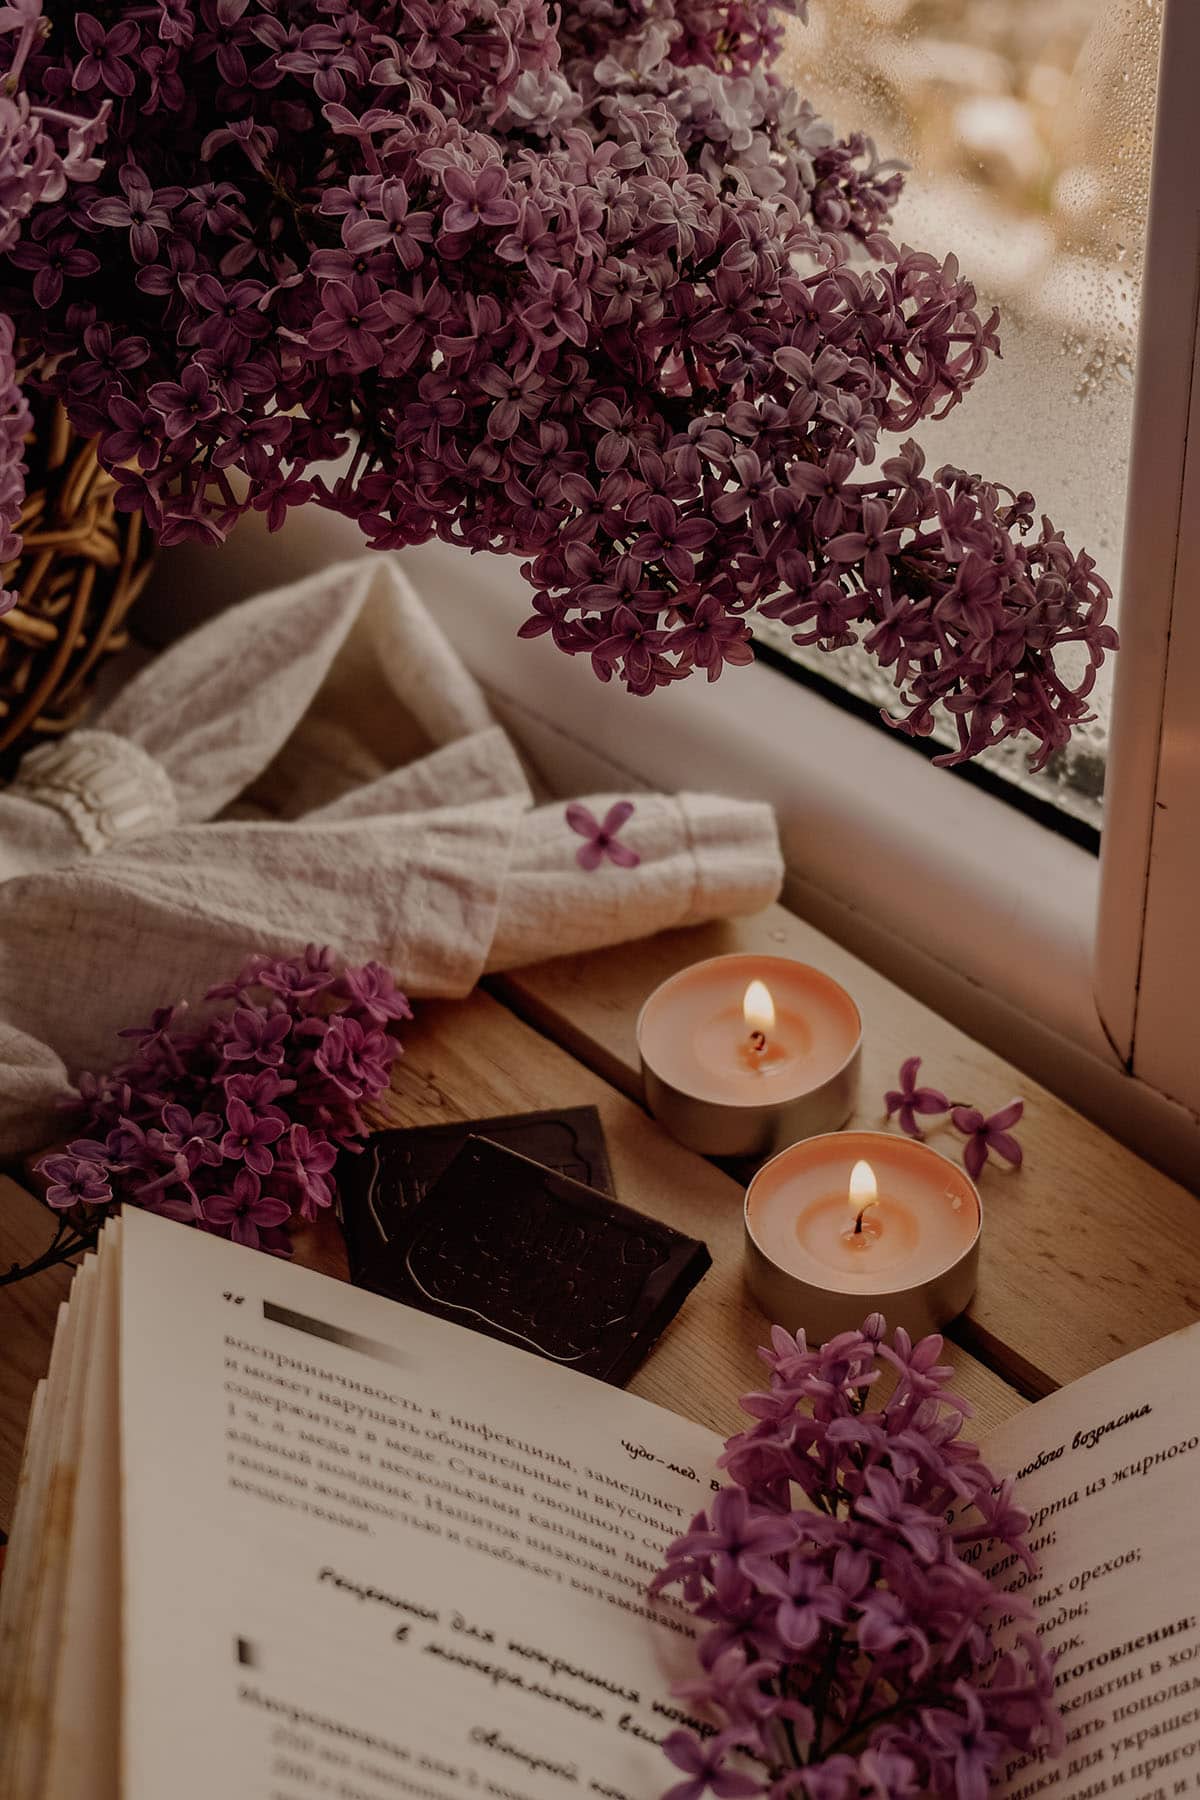 Image of lavendar flowers, two lit candles, and an open book next to a window on a peaceful morning.